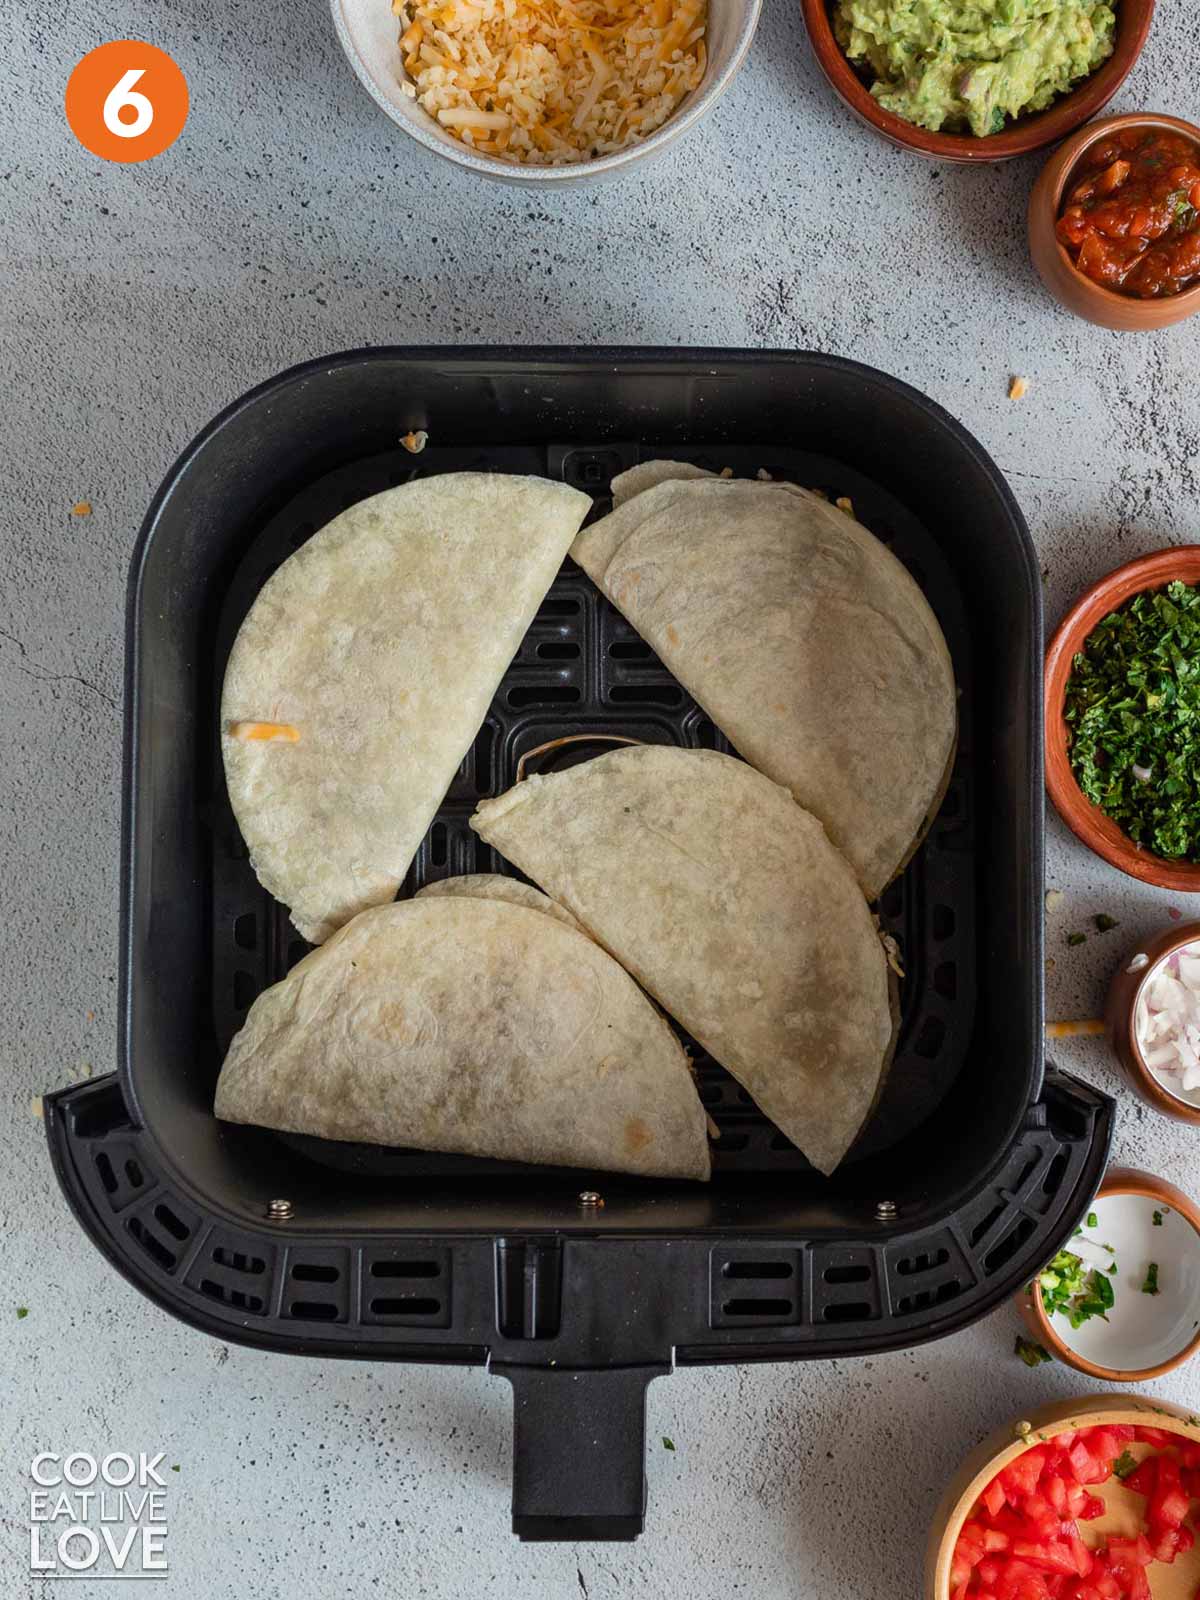 Air fryer quesadillas placed inside the air fryer basket to cook.